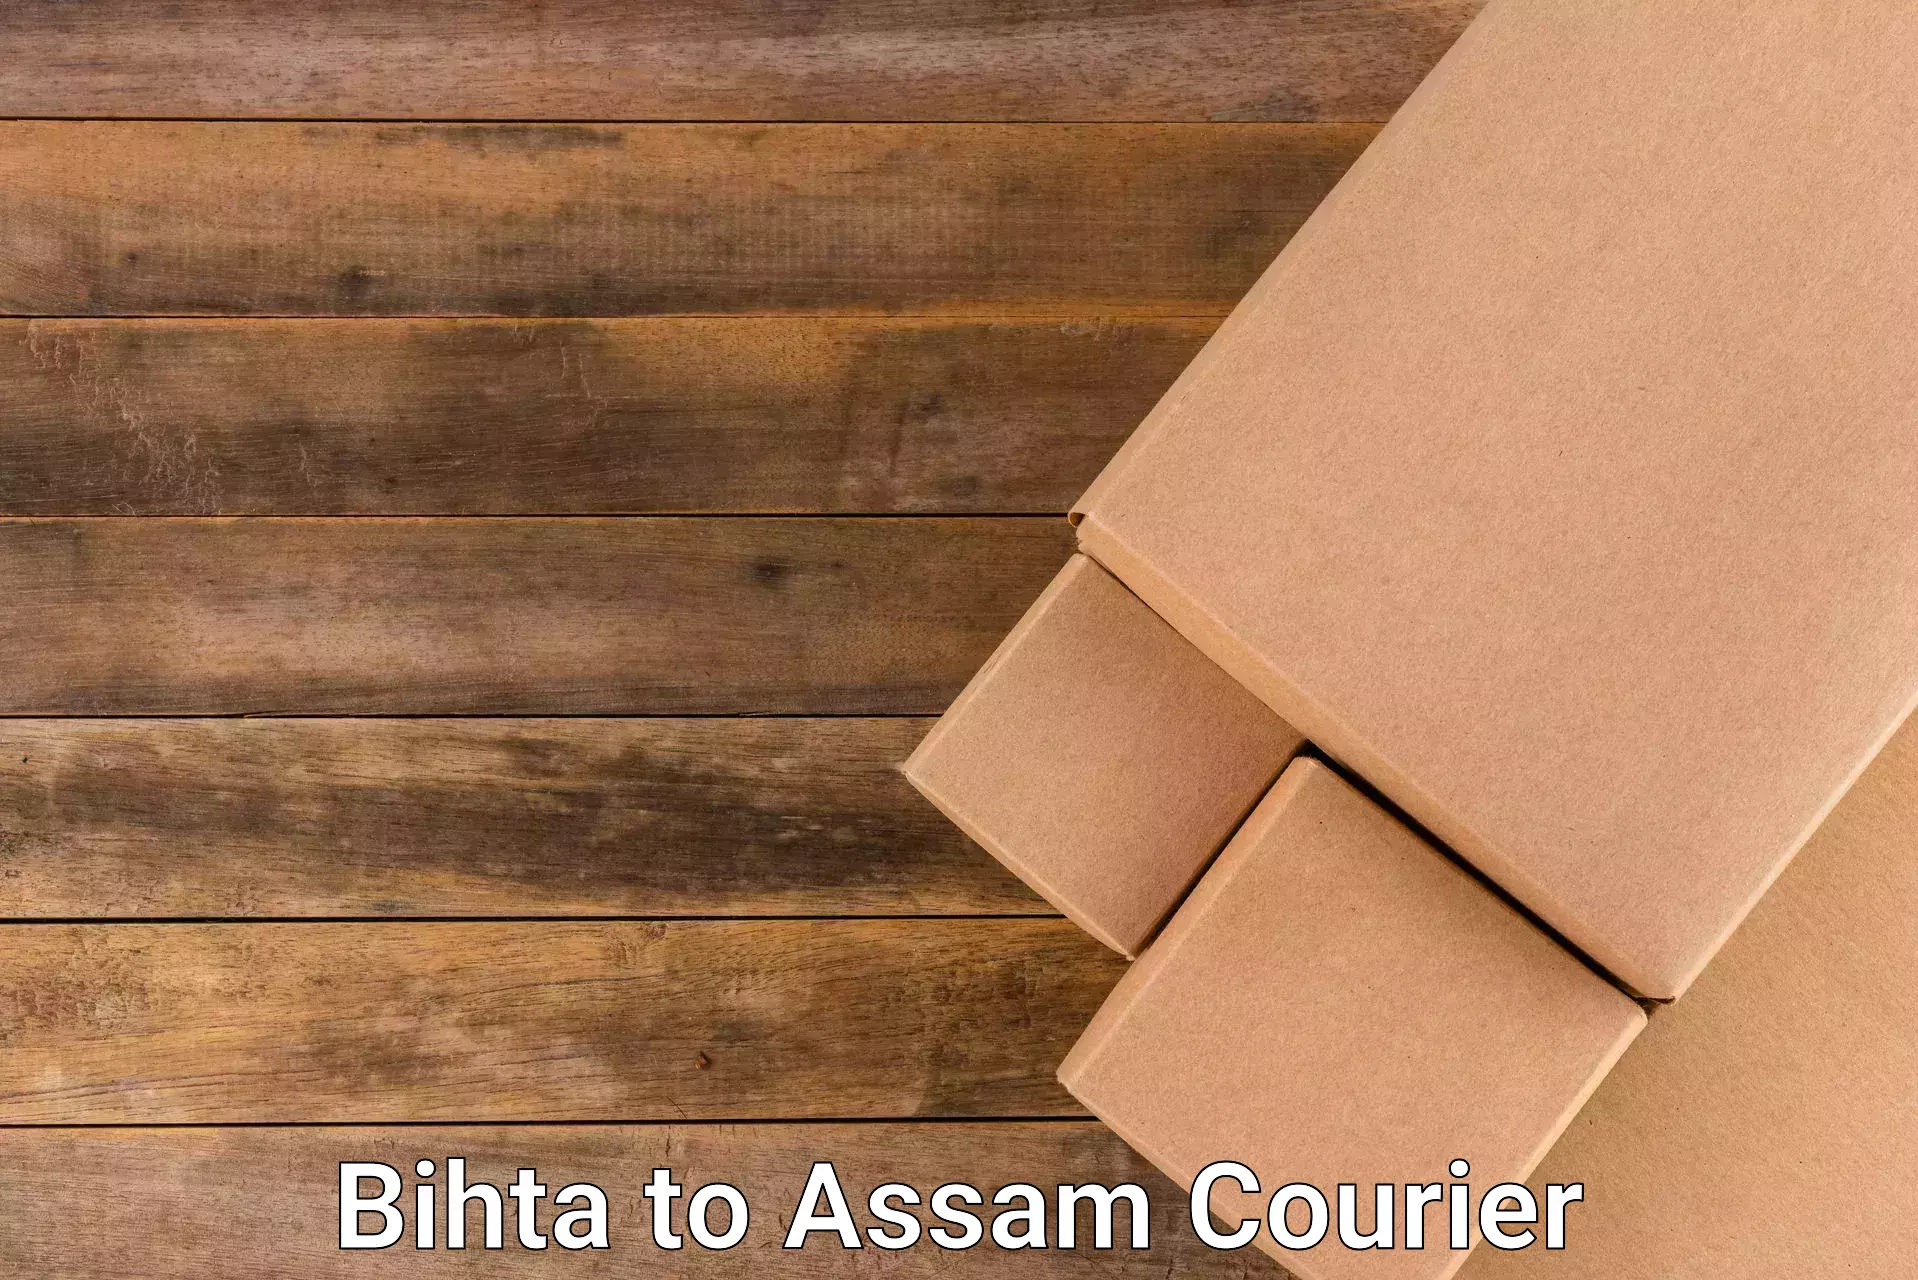 Global freight services Bihta to Assam